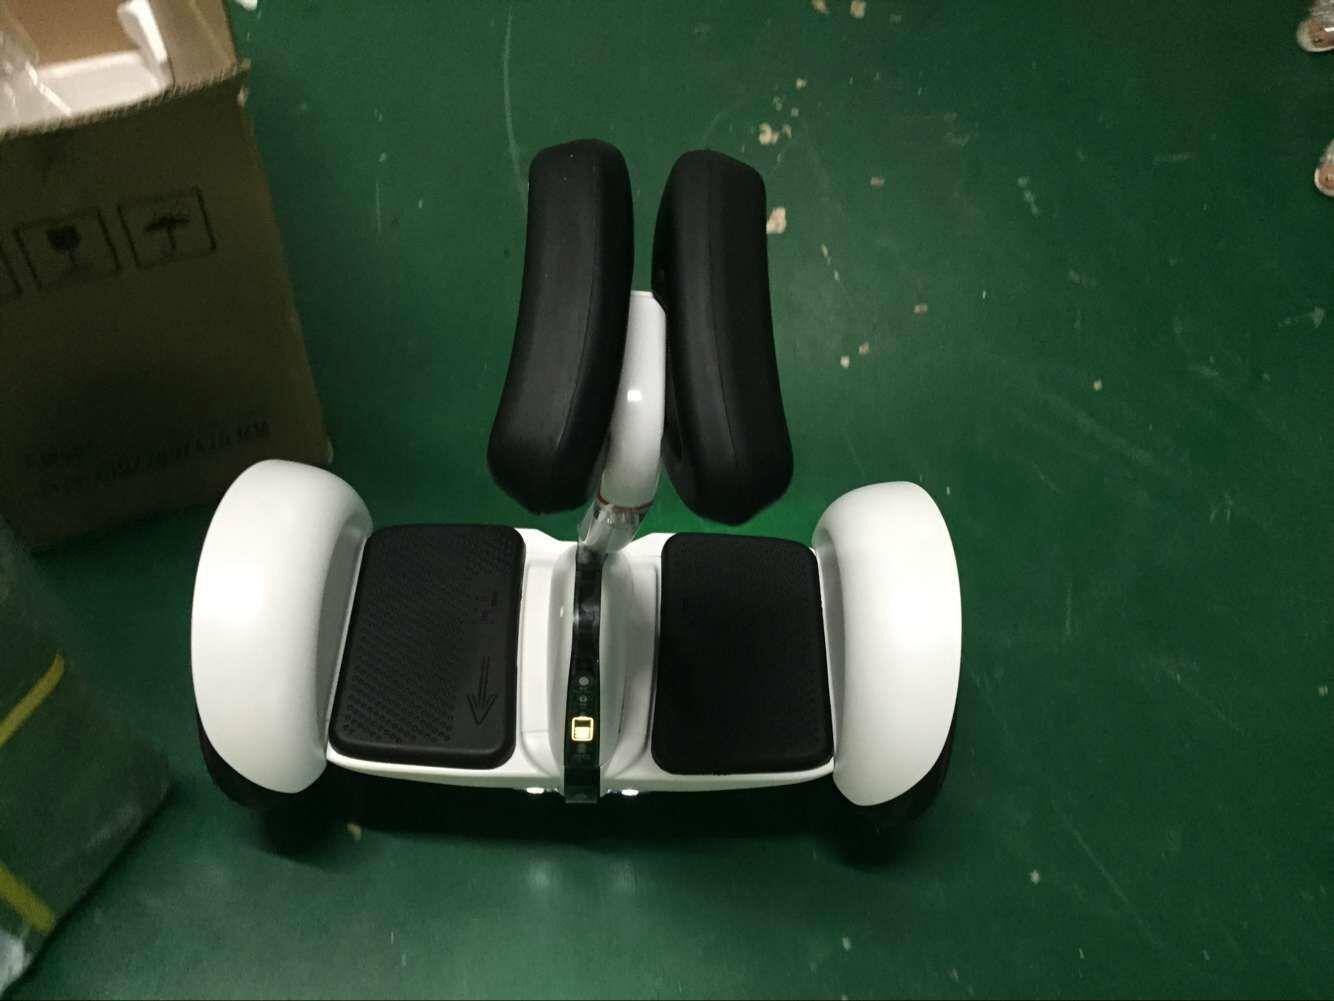 xiaomi NO.9  scooter 10 inch two wheels scooter with smartphone app control 4